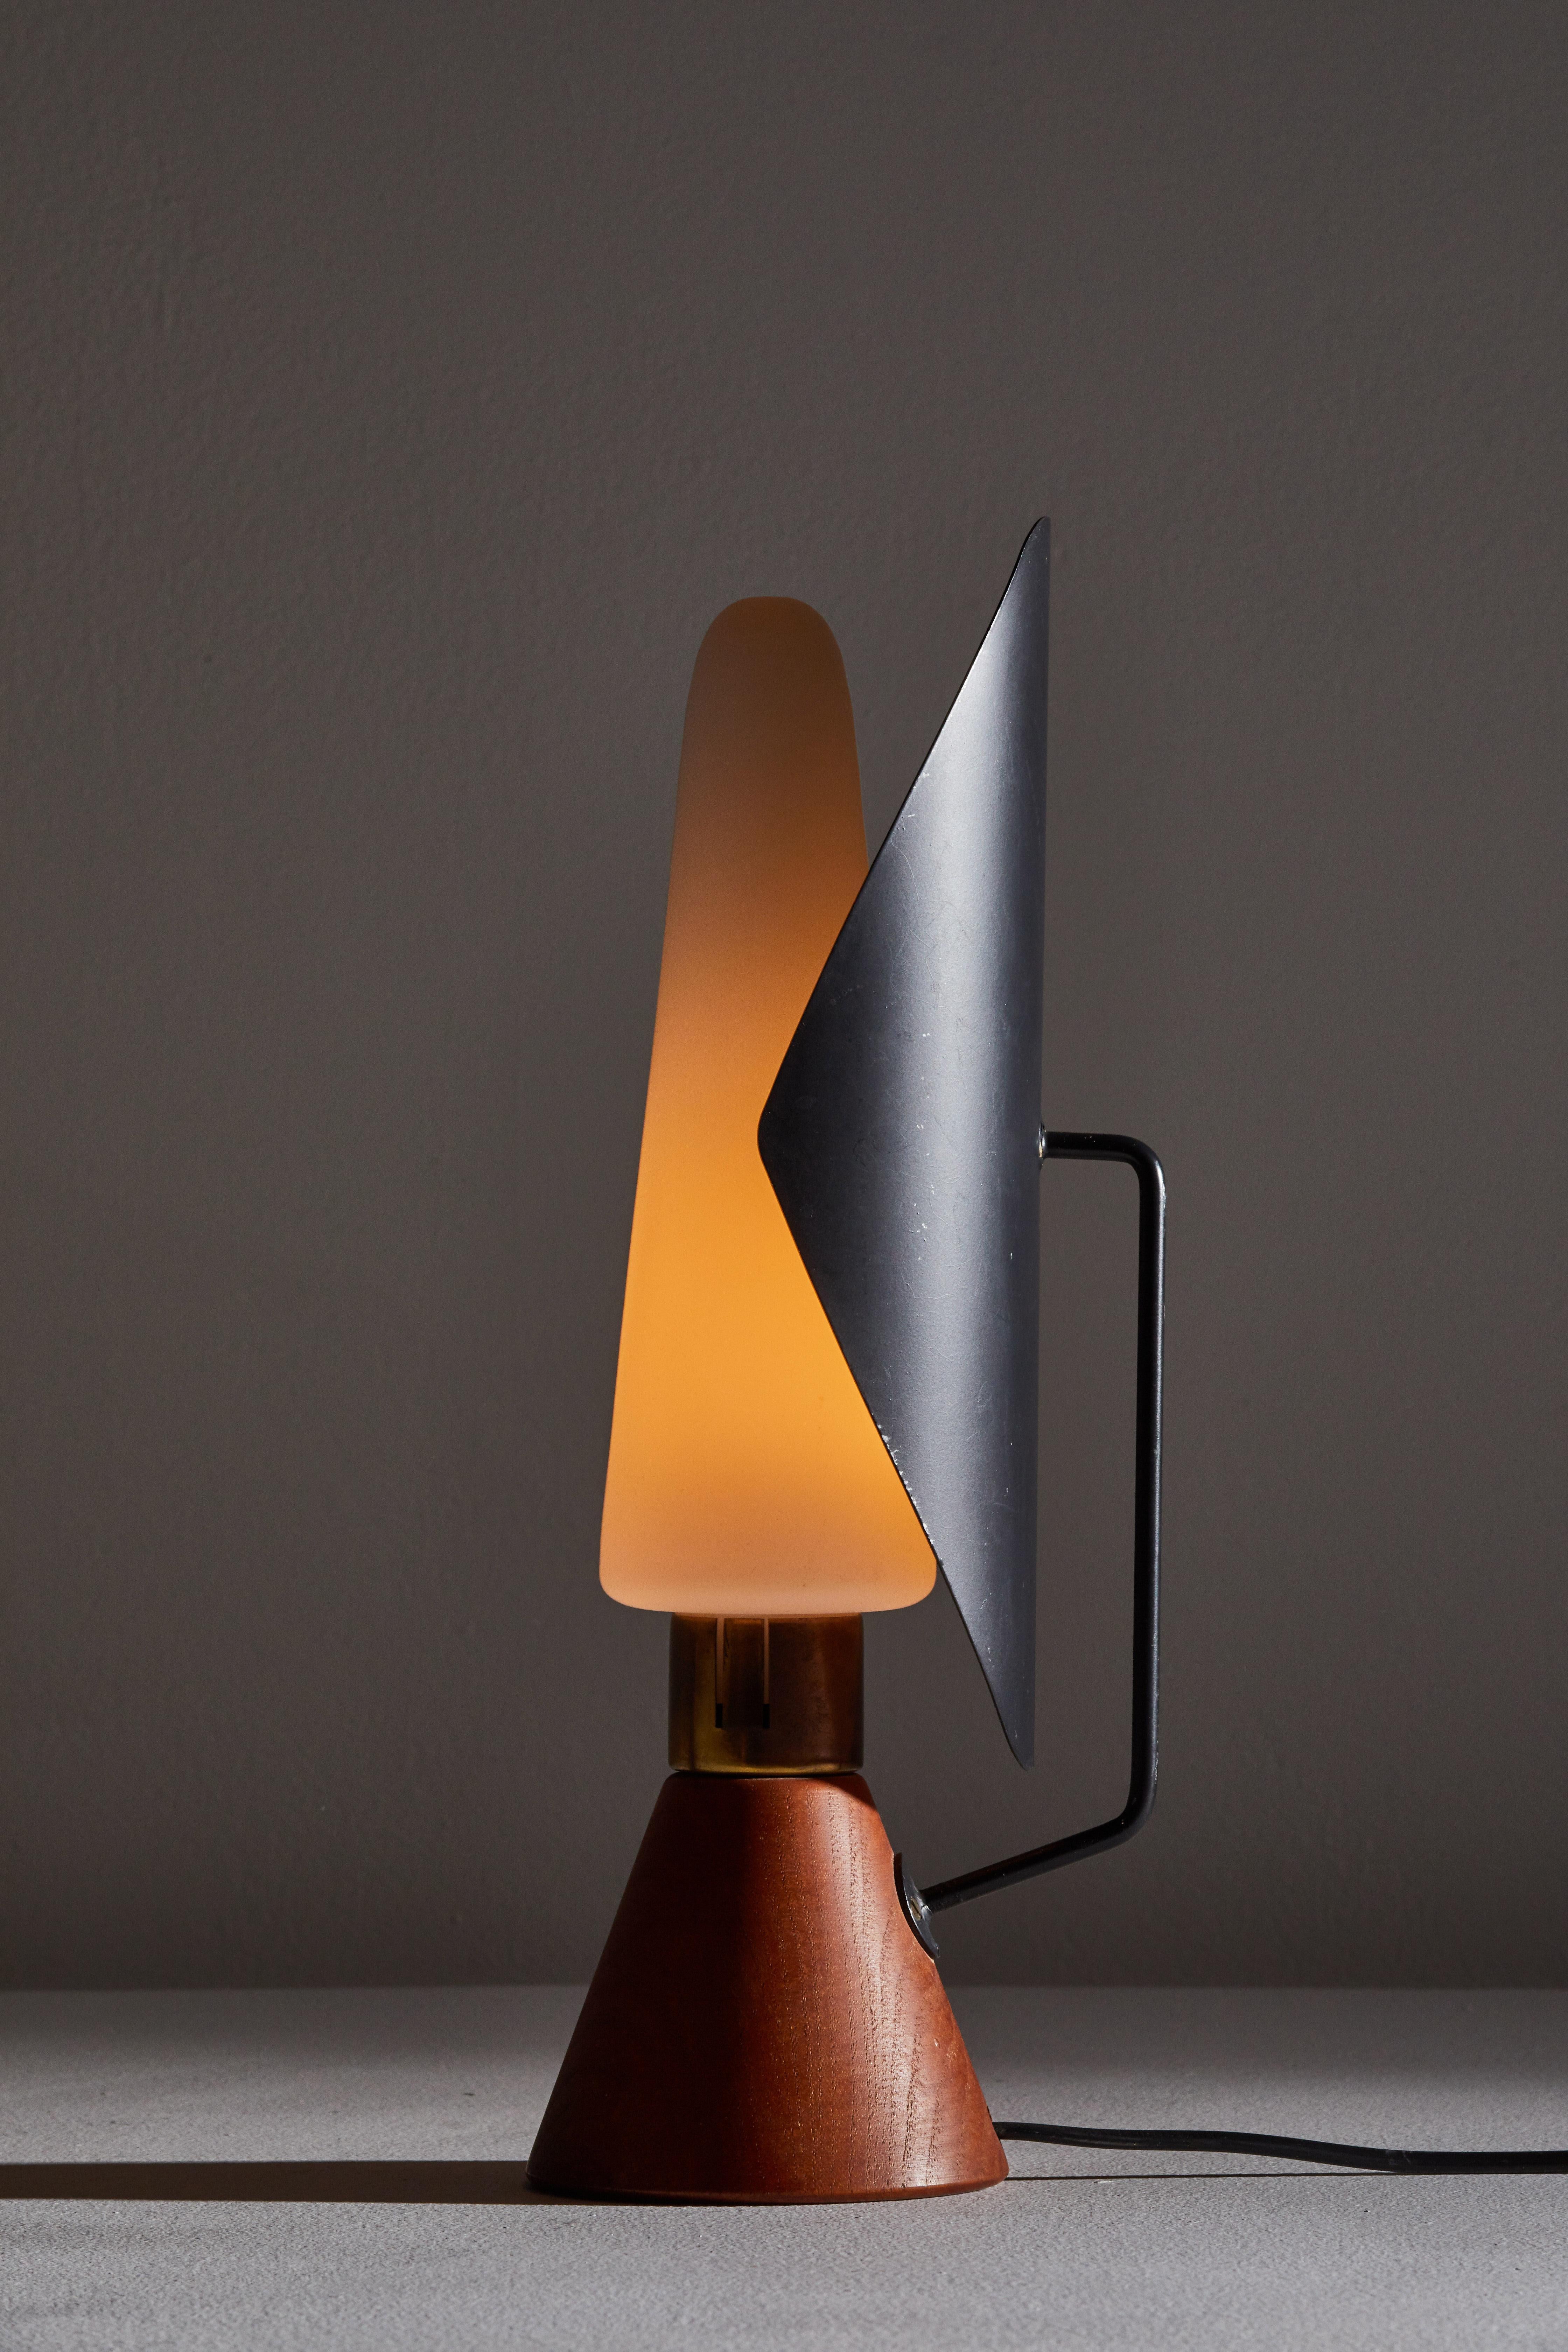 Rare table lamp by Svend Aage Holm Sørensen for ASEA . Designed and manufactured in Sweden, circa 1950s. Teak base, enameled metal reflector, brass fittings, and brushed satin glass diffuser. Original cord. Takes one E27 European candelabra 75w